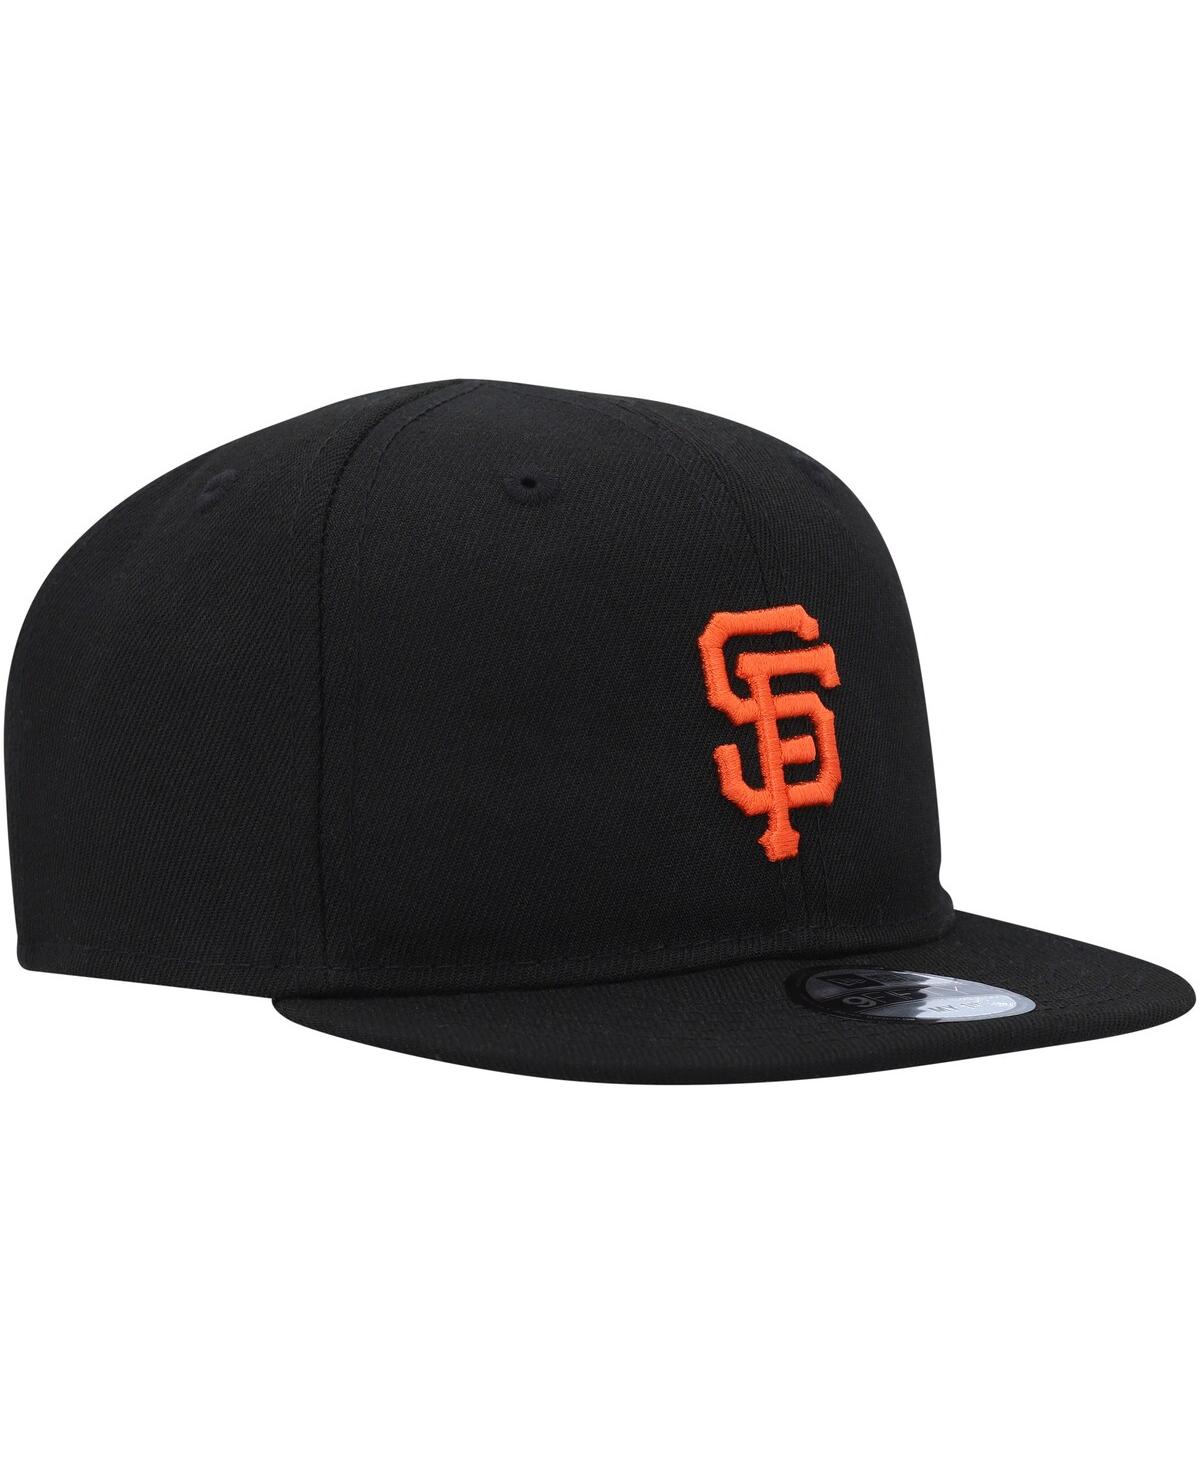 Shop New Era Infant Boys And Girls  Black San Francisco Giants My First 9fifty Adjustable Hat